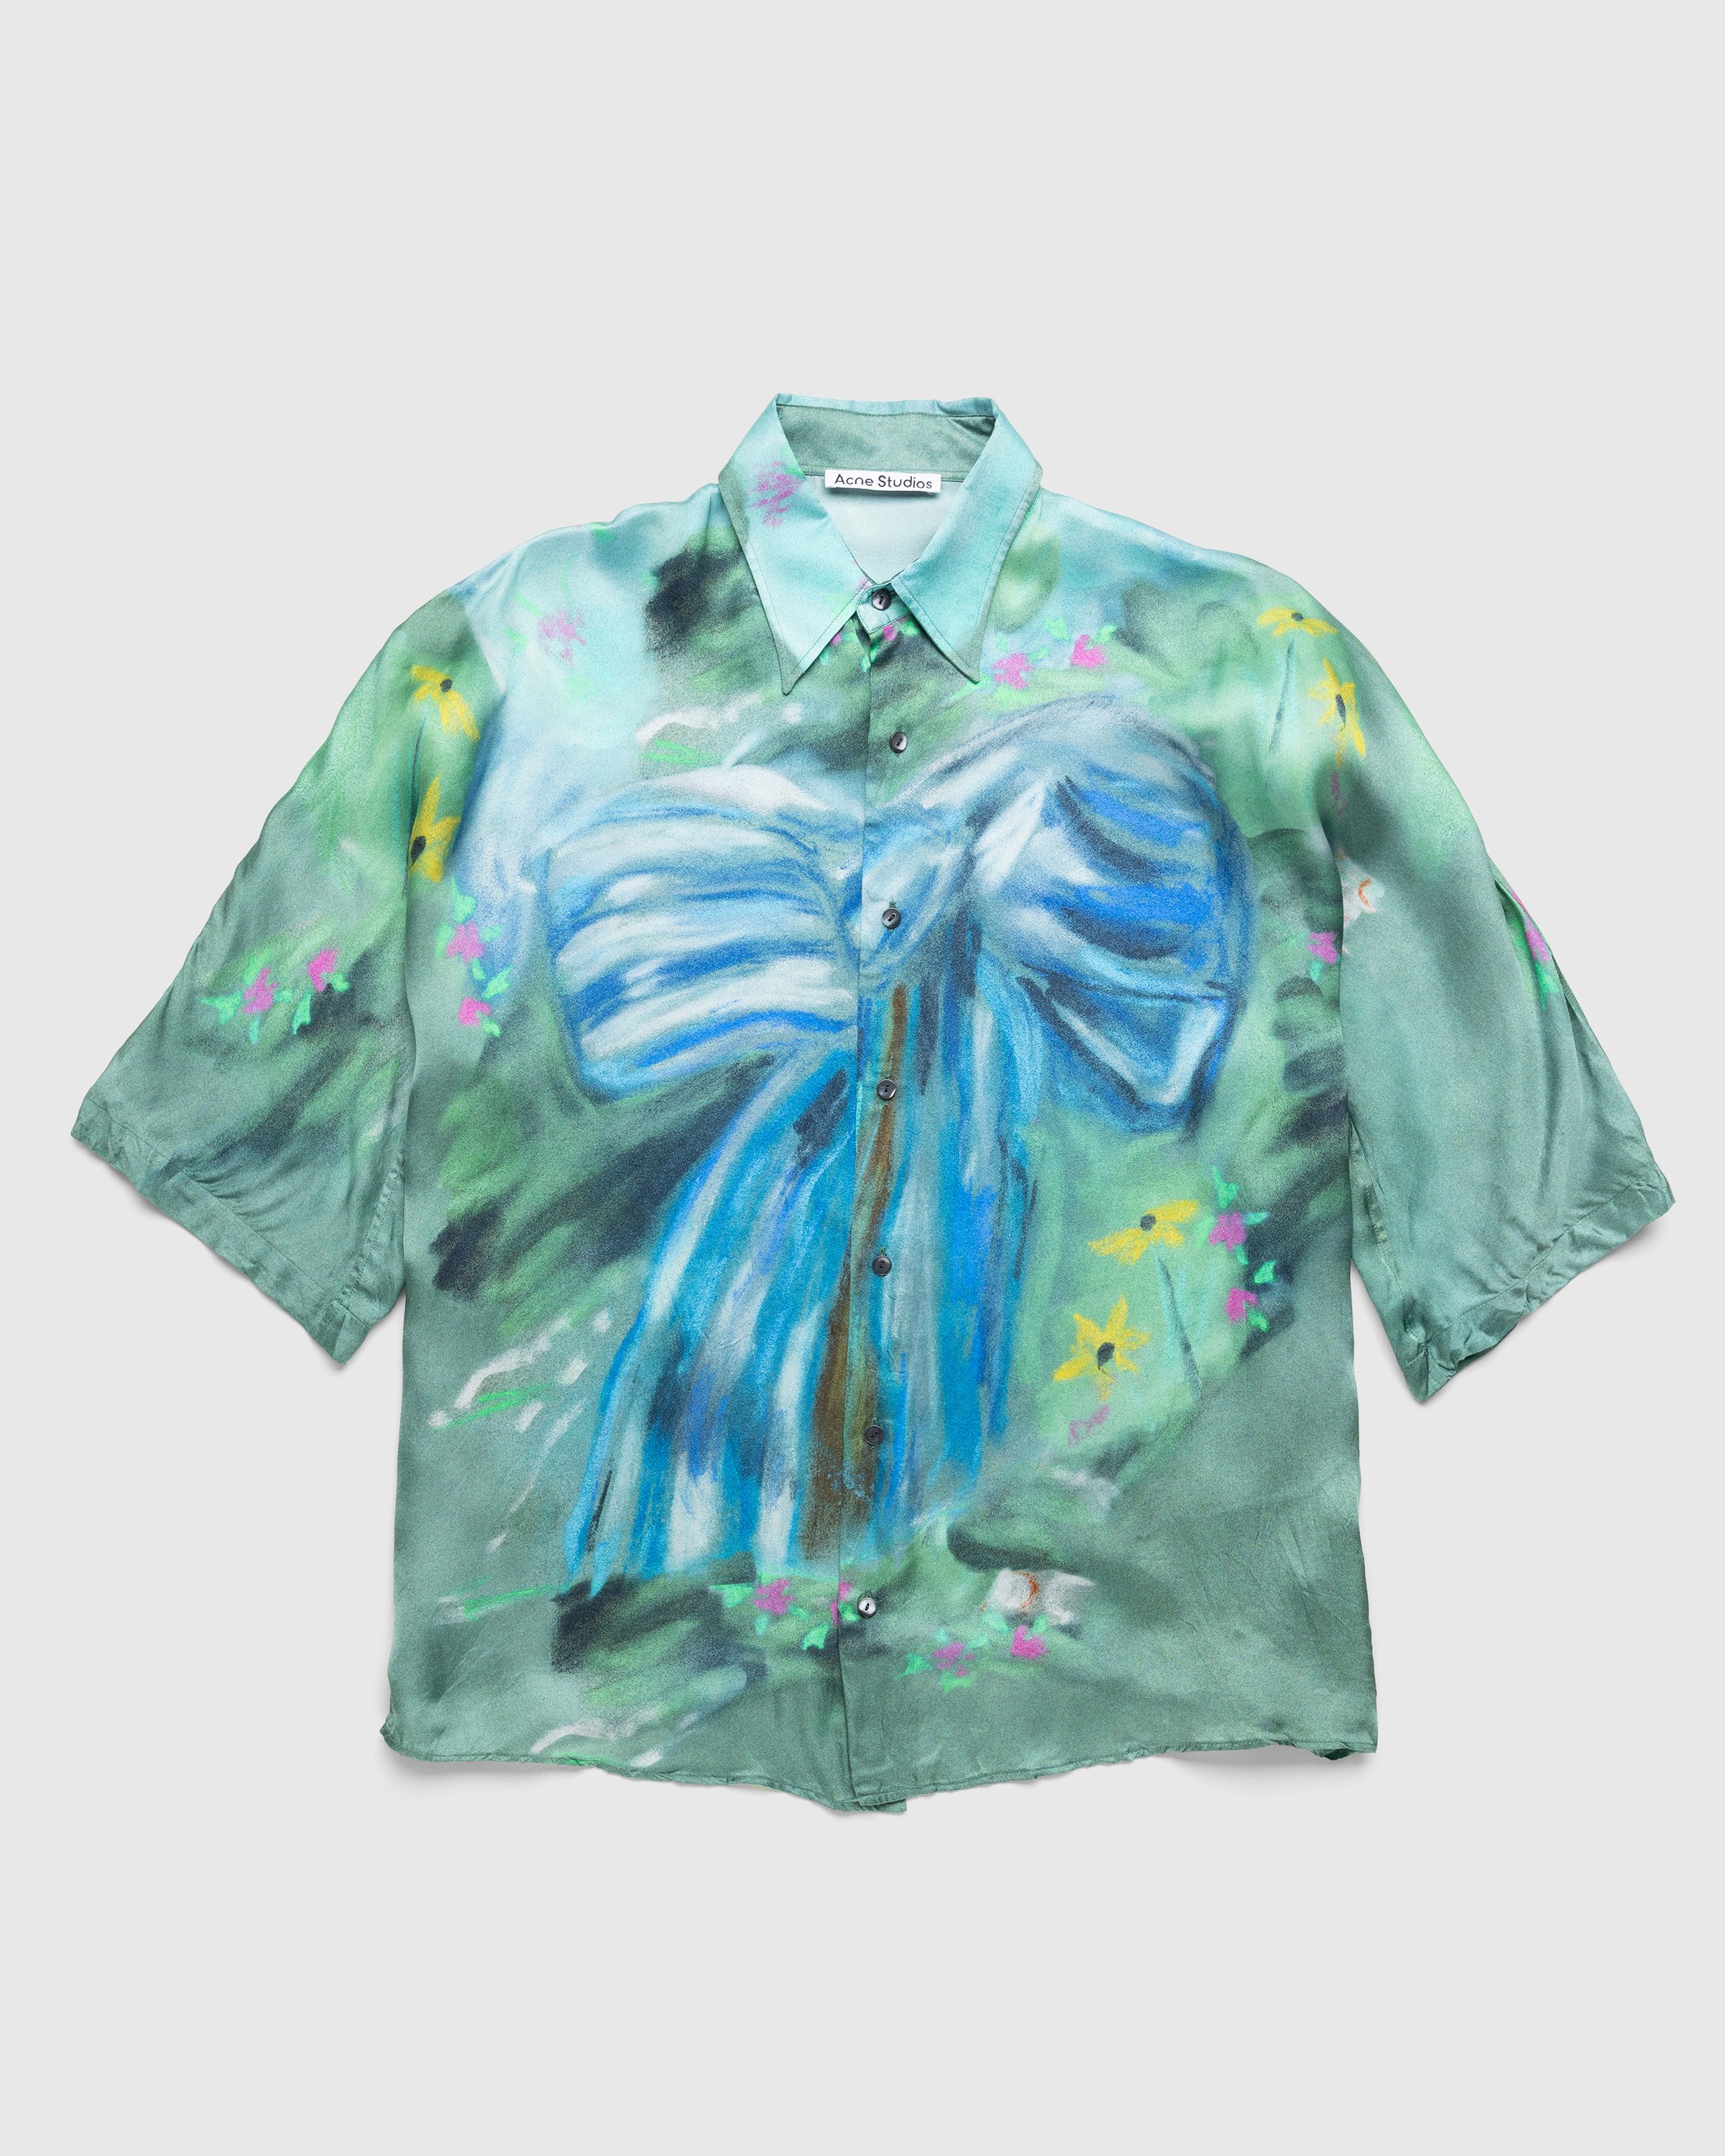 Acne Studios - Printed Button-Up Shirt Blue - Clothing - Blue - Image 1